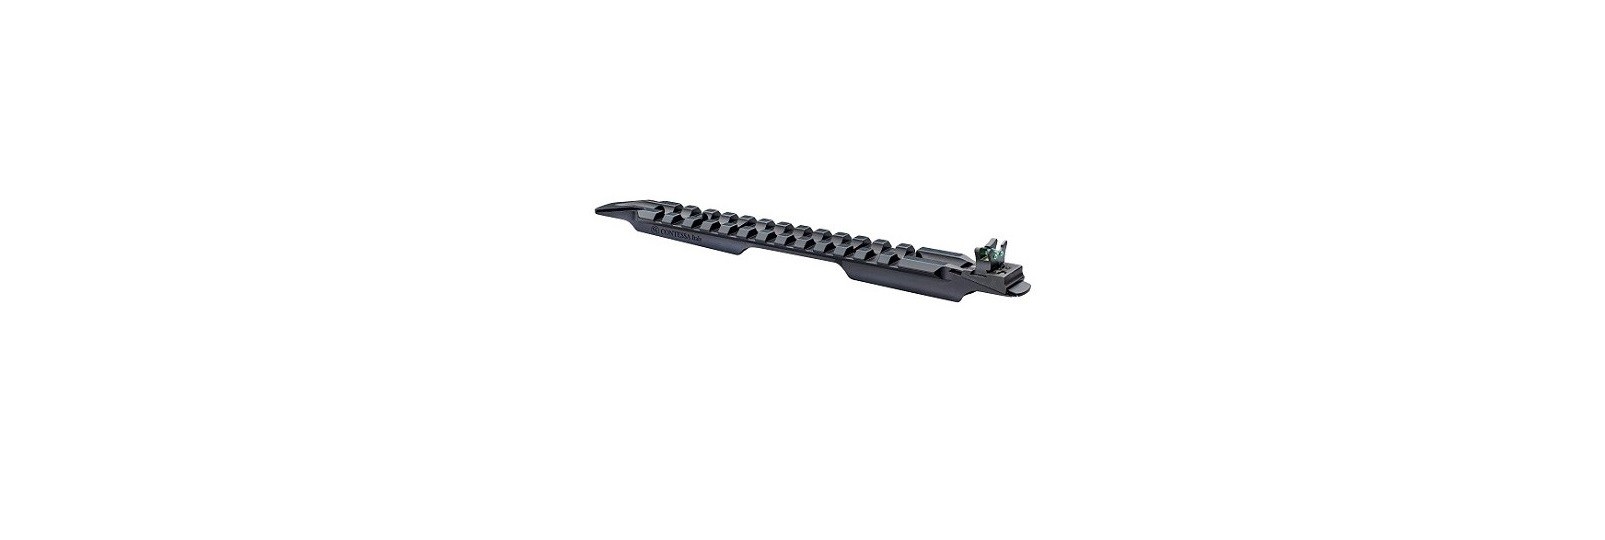 Scina Picatinny Lever Action Boarbuster